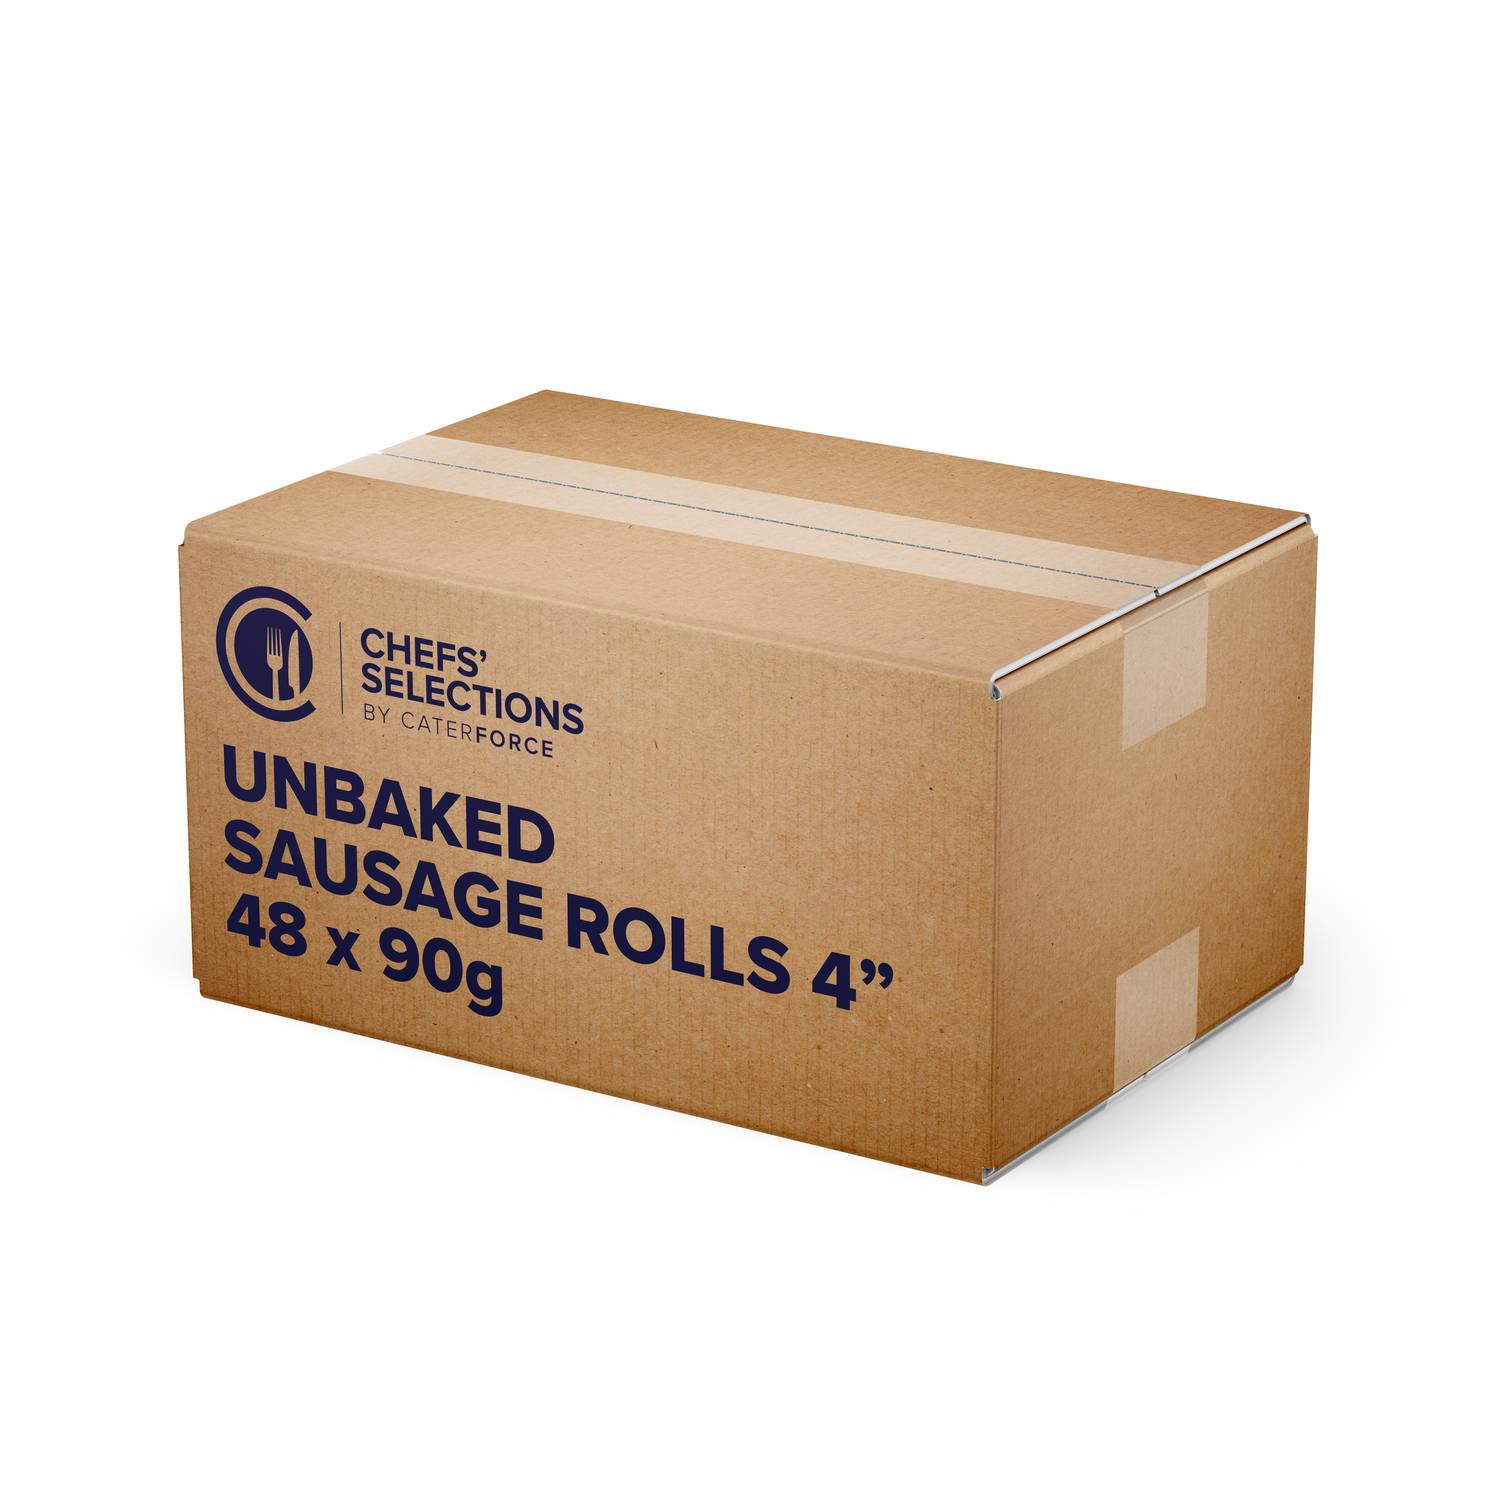 Chefs’ Selections 4″ Sausage Rolls (48 x 90g)